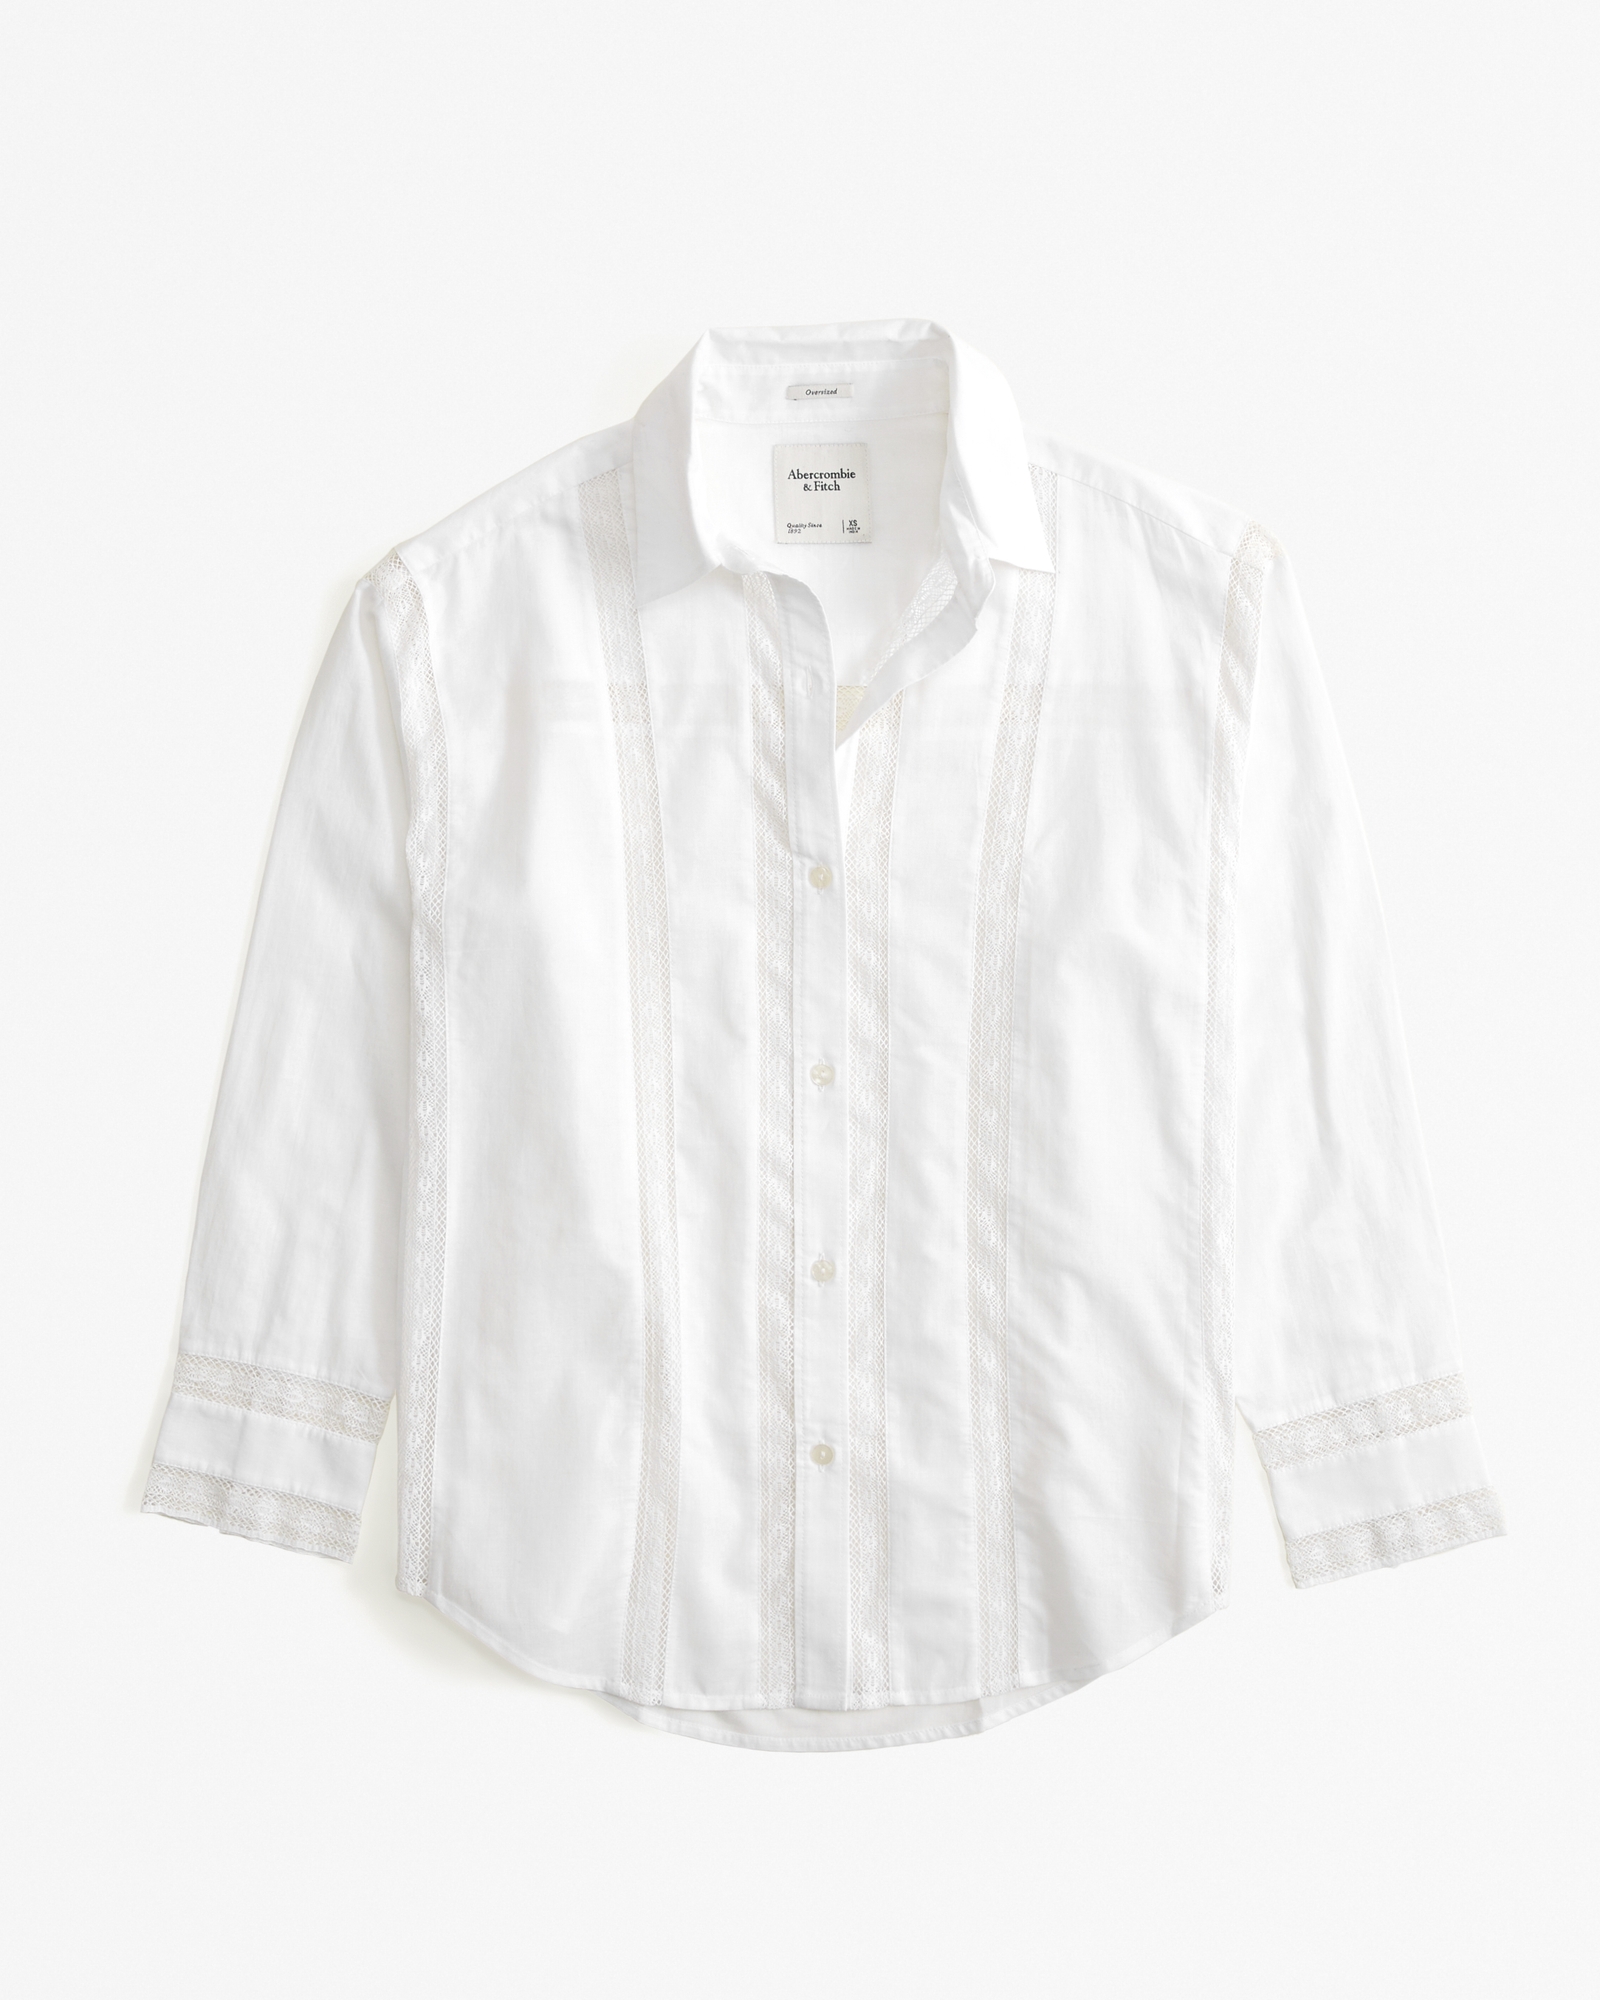 Women's Oversized Lace-Trim Embroidered Button-Up Shirt